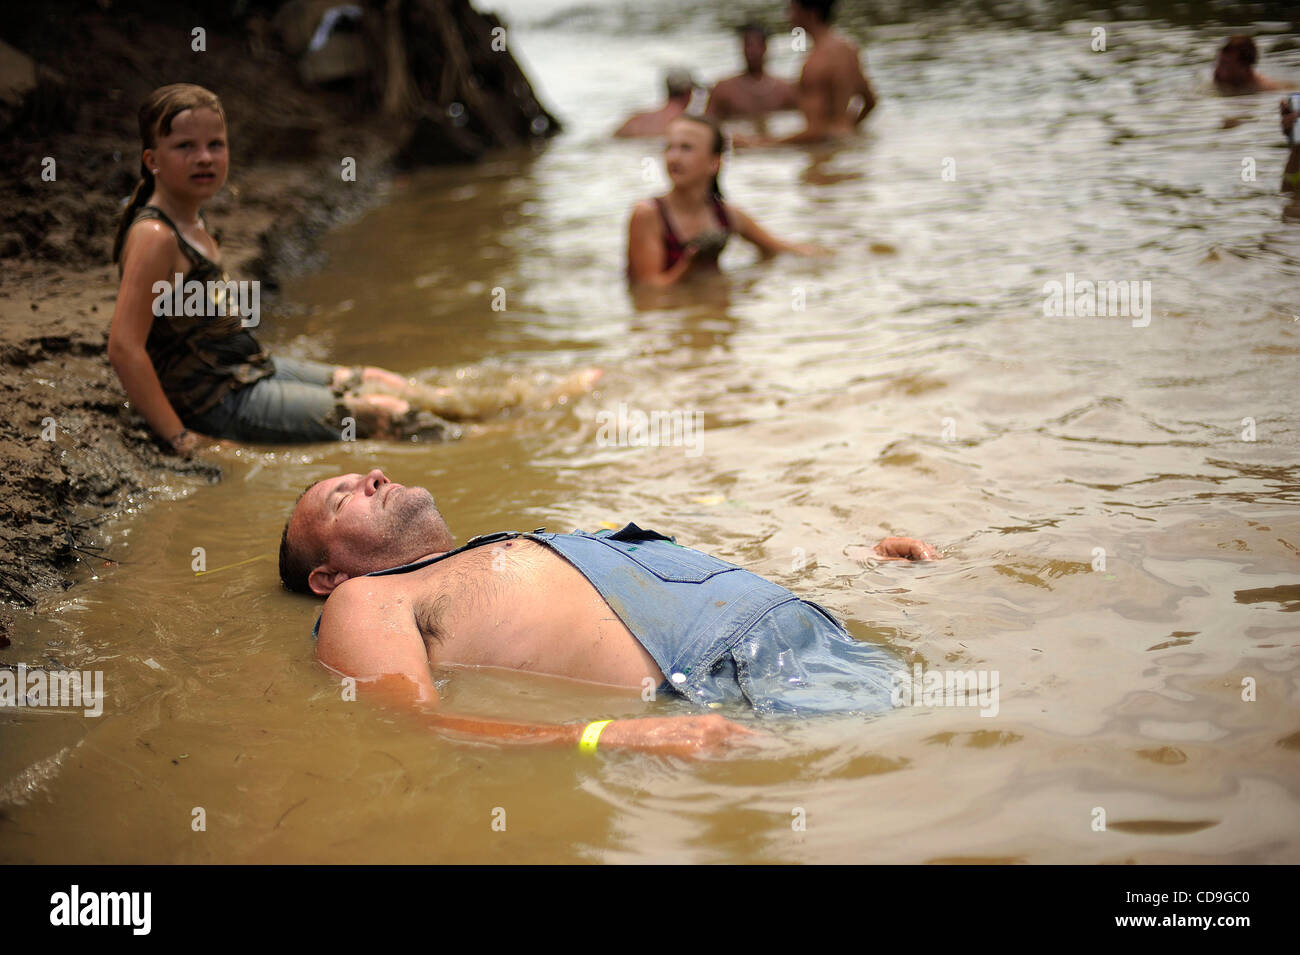 SATURDAY JULY 10, 2010 EAST DUBLIN, GEORGIA -A drunk Redneck Games participant  lies in the river at Buckeye Park during the Redneck Games in East Dublin, Georgia. The games started in 1996 as spoof on the Olympics which were being held in Atlanta, Georgia at the time. participants compete in events Stock Photo